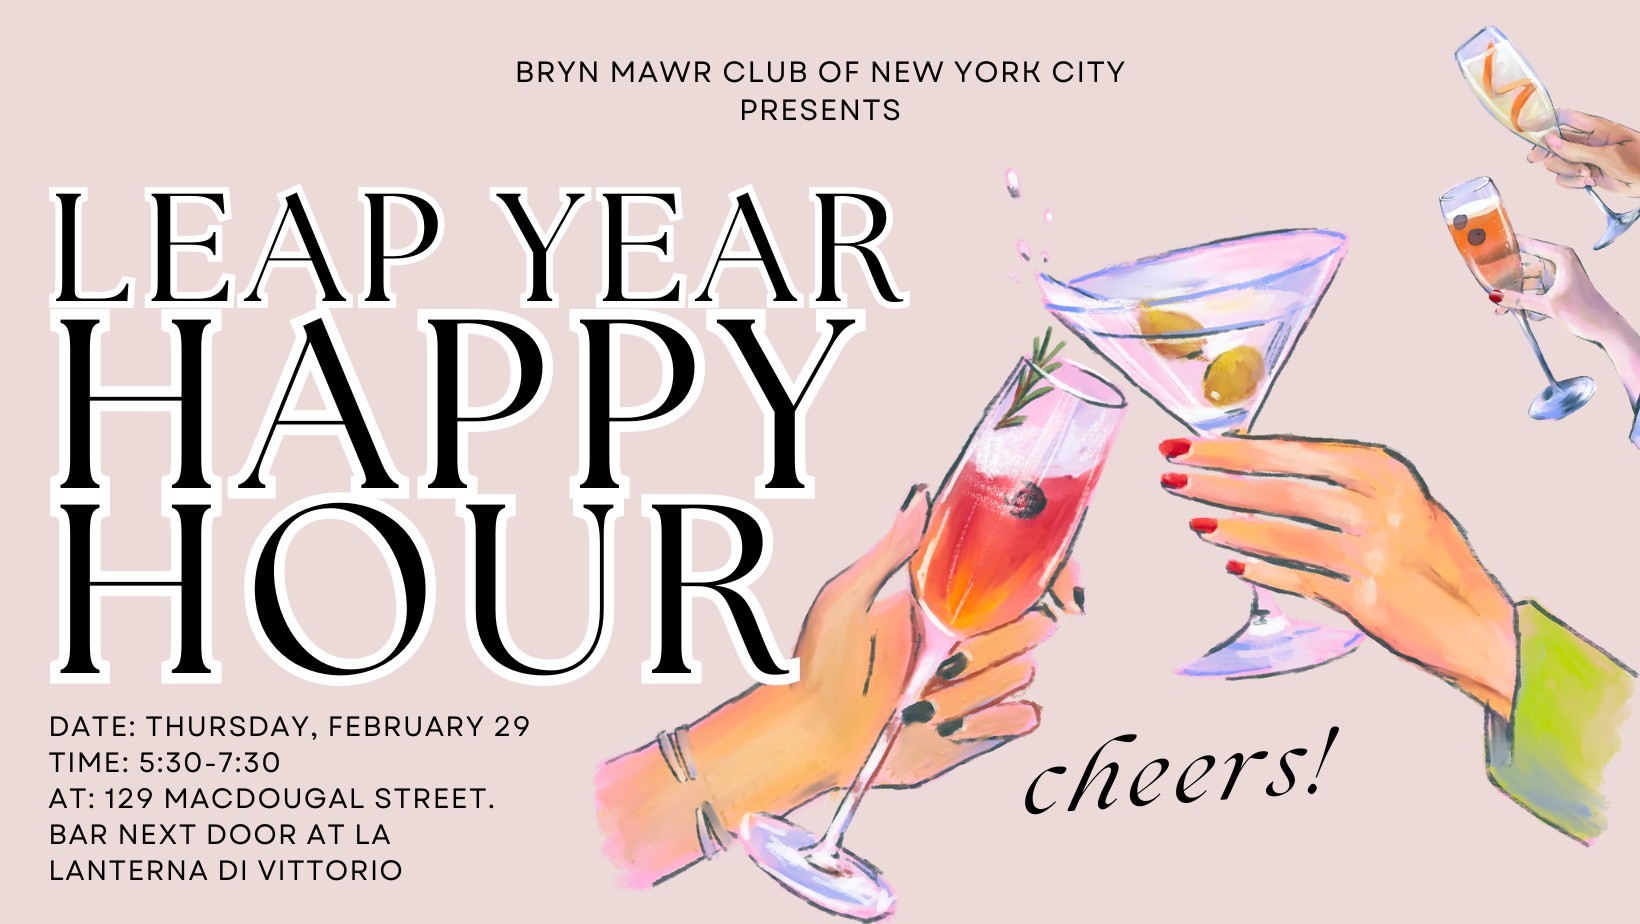 It’s a leap year. What will you do with that extra day? We hope you’ll join us at the first happy hour of the year with the Bryn Mawr Club of NYC! Come celebrate the leap year with us. 